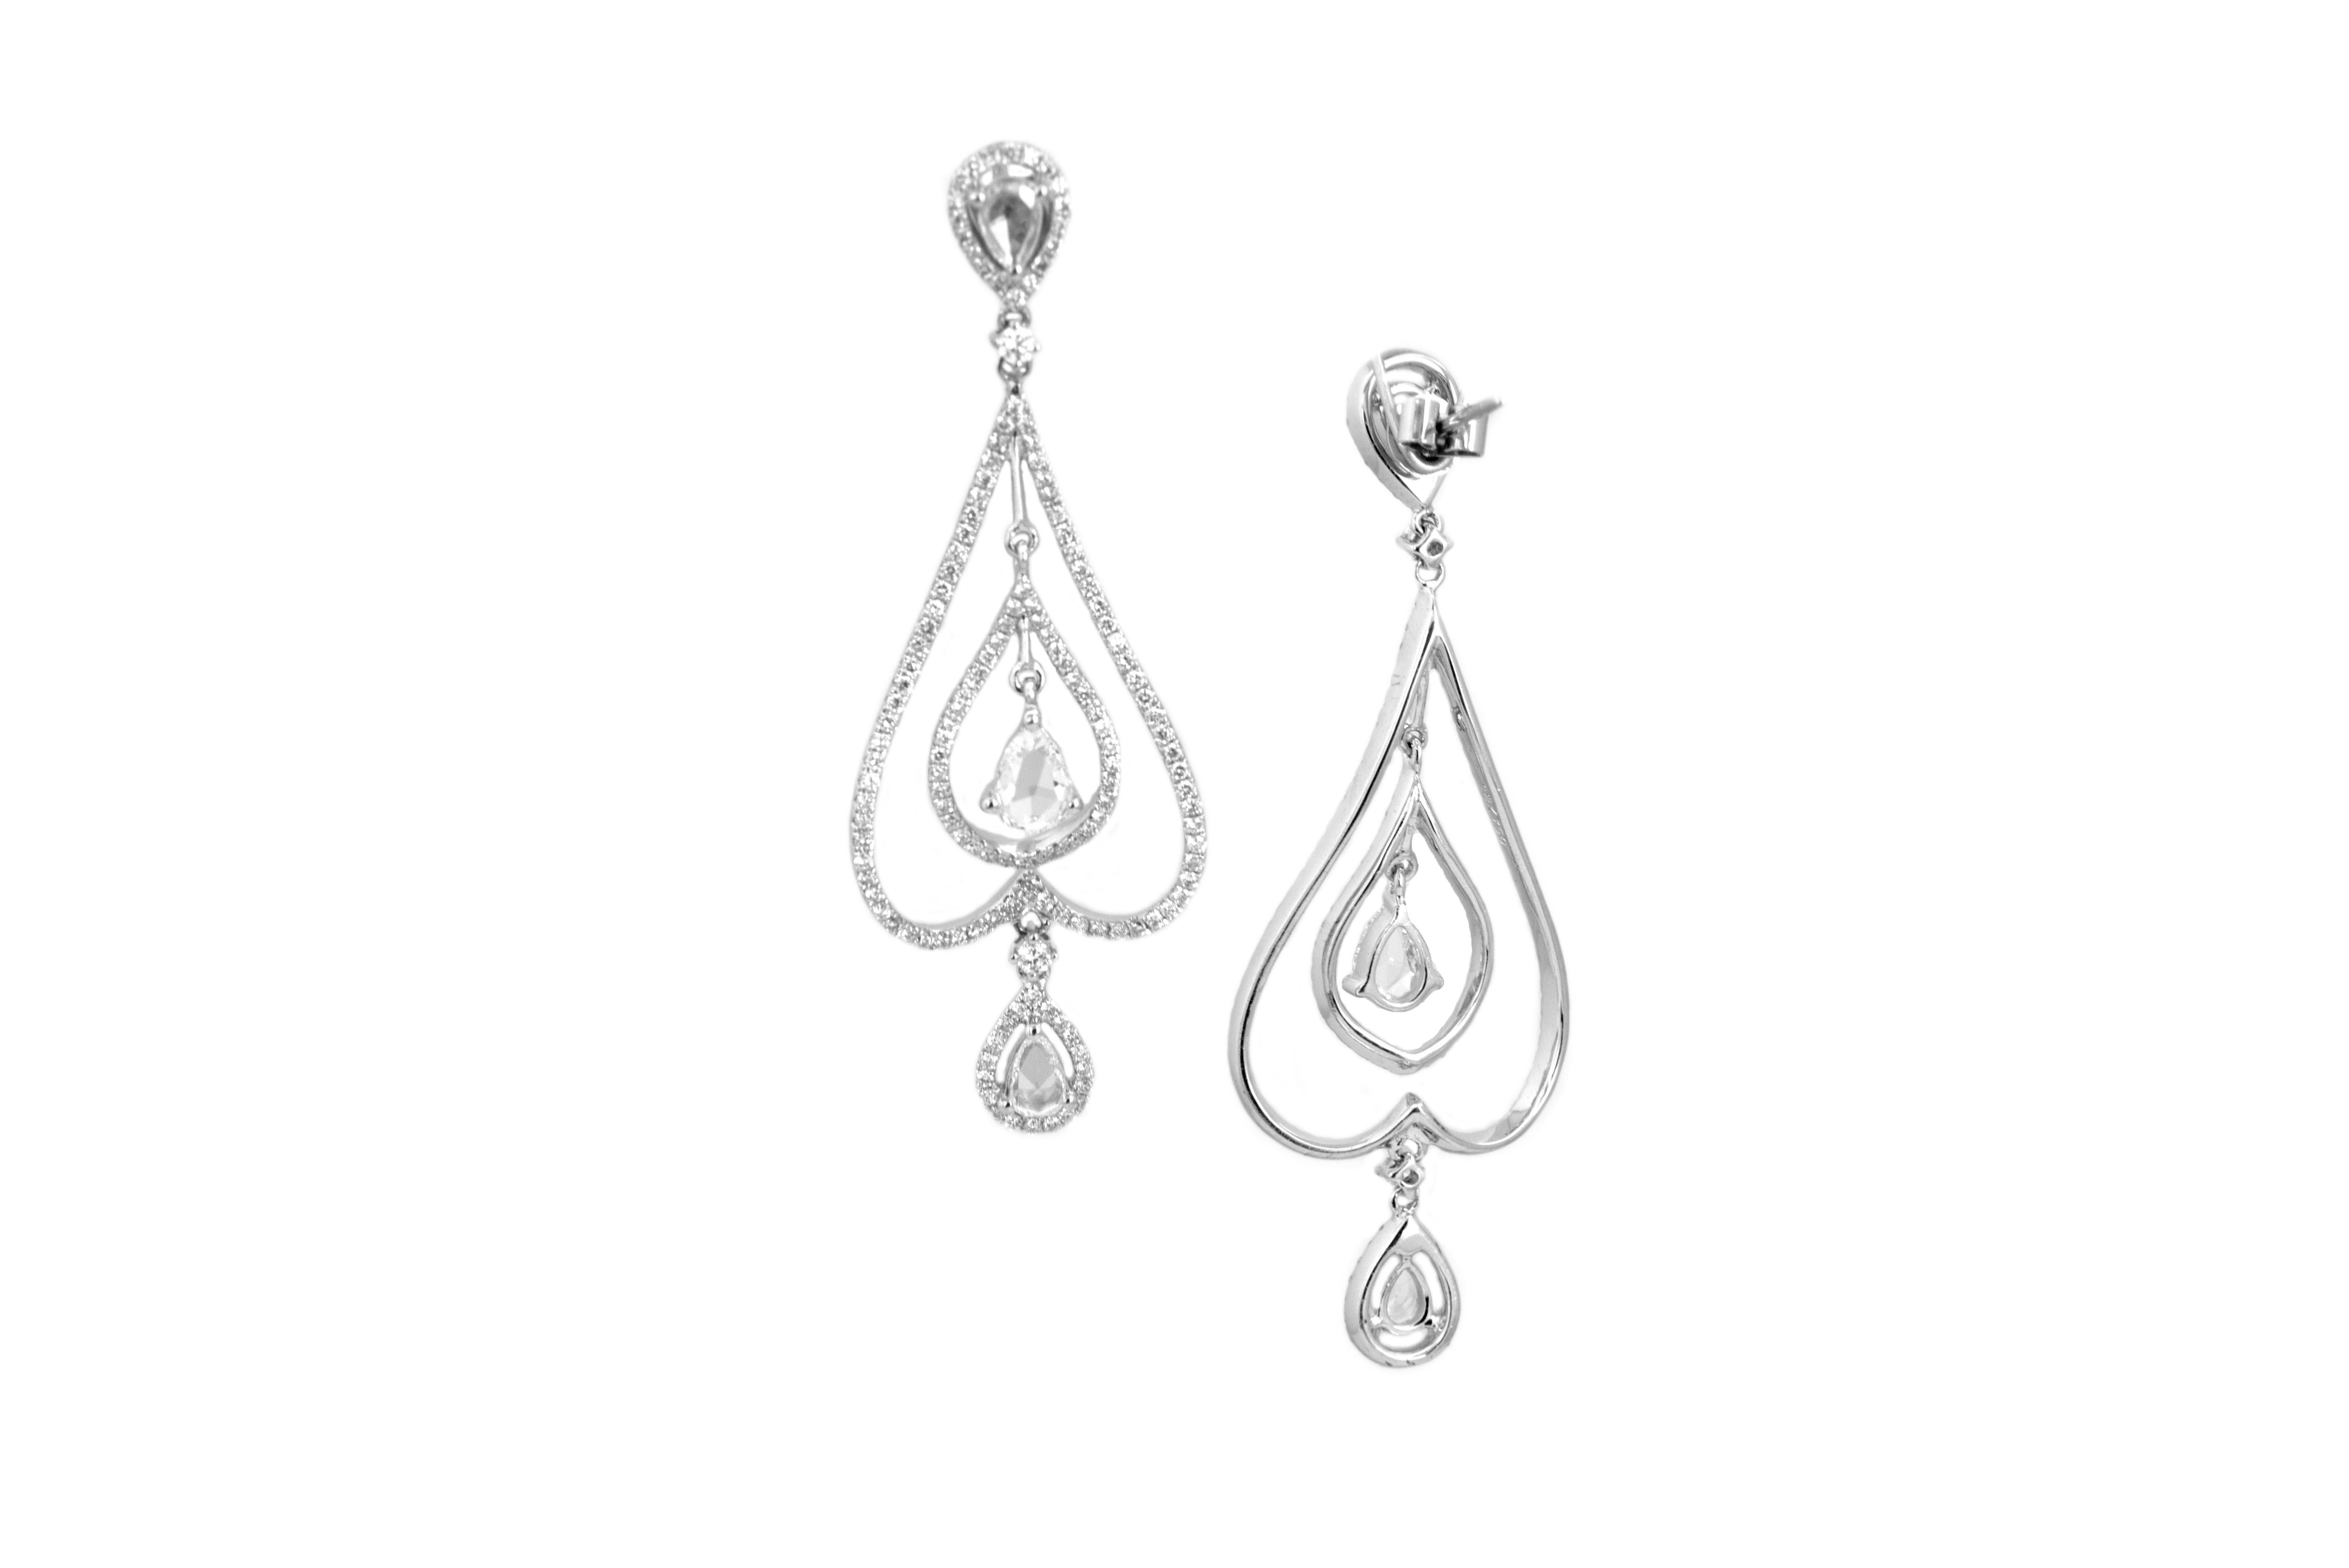 This earring has 6 Rose Cut diamonds - all of which are between 20 and 25 pointers in VVS quality.